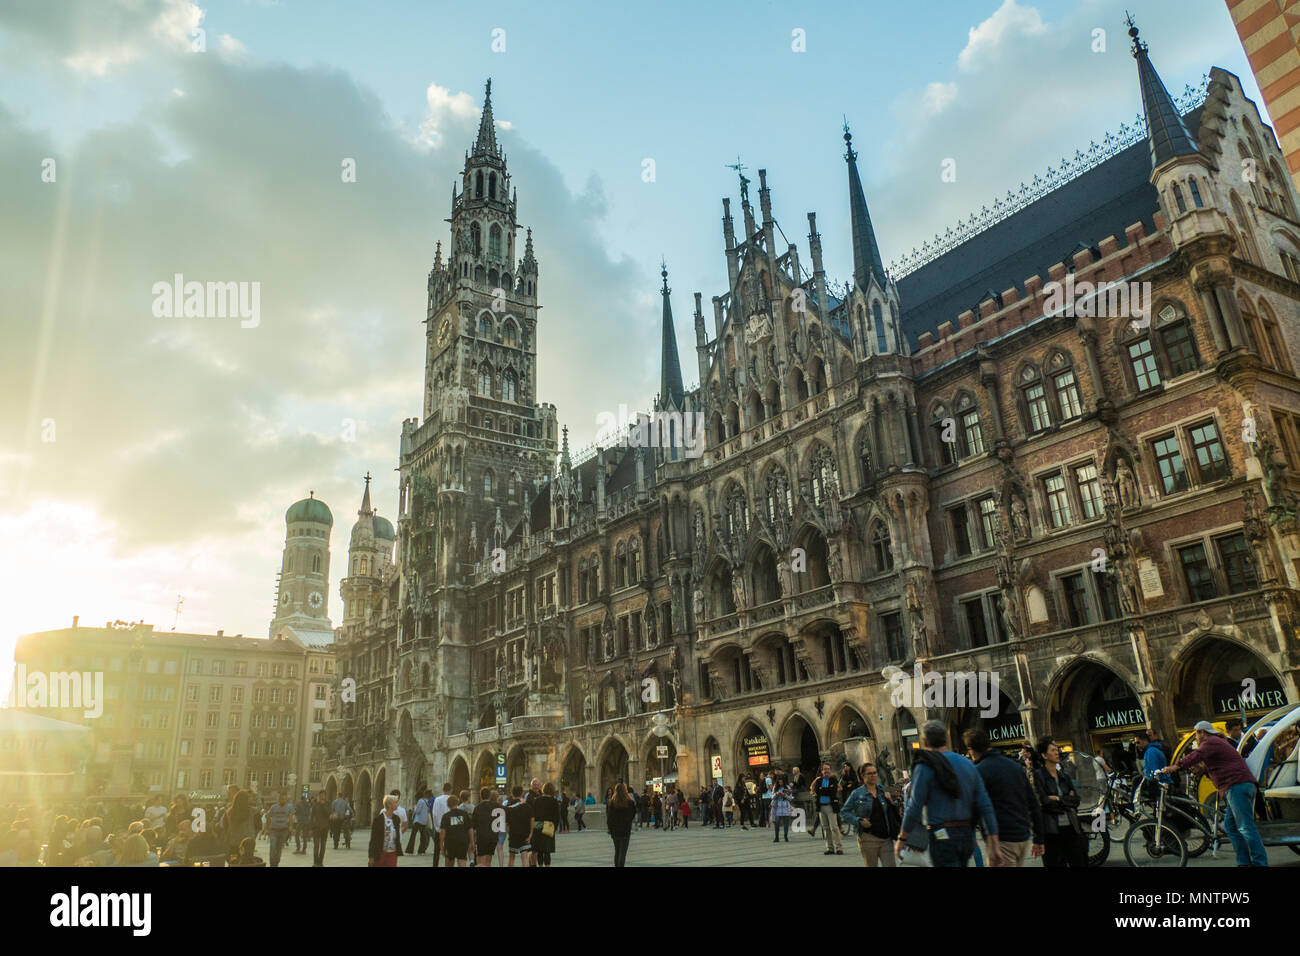 Marienplatz sqaure with the Neues Rathaus (New Town Hall) in Munich, capital of Bavaria, Germany. Stock Photo